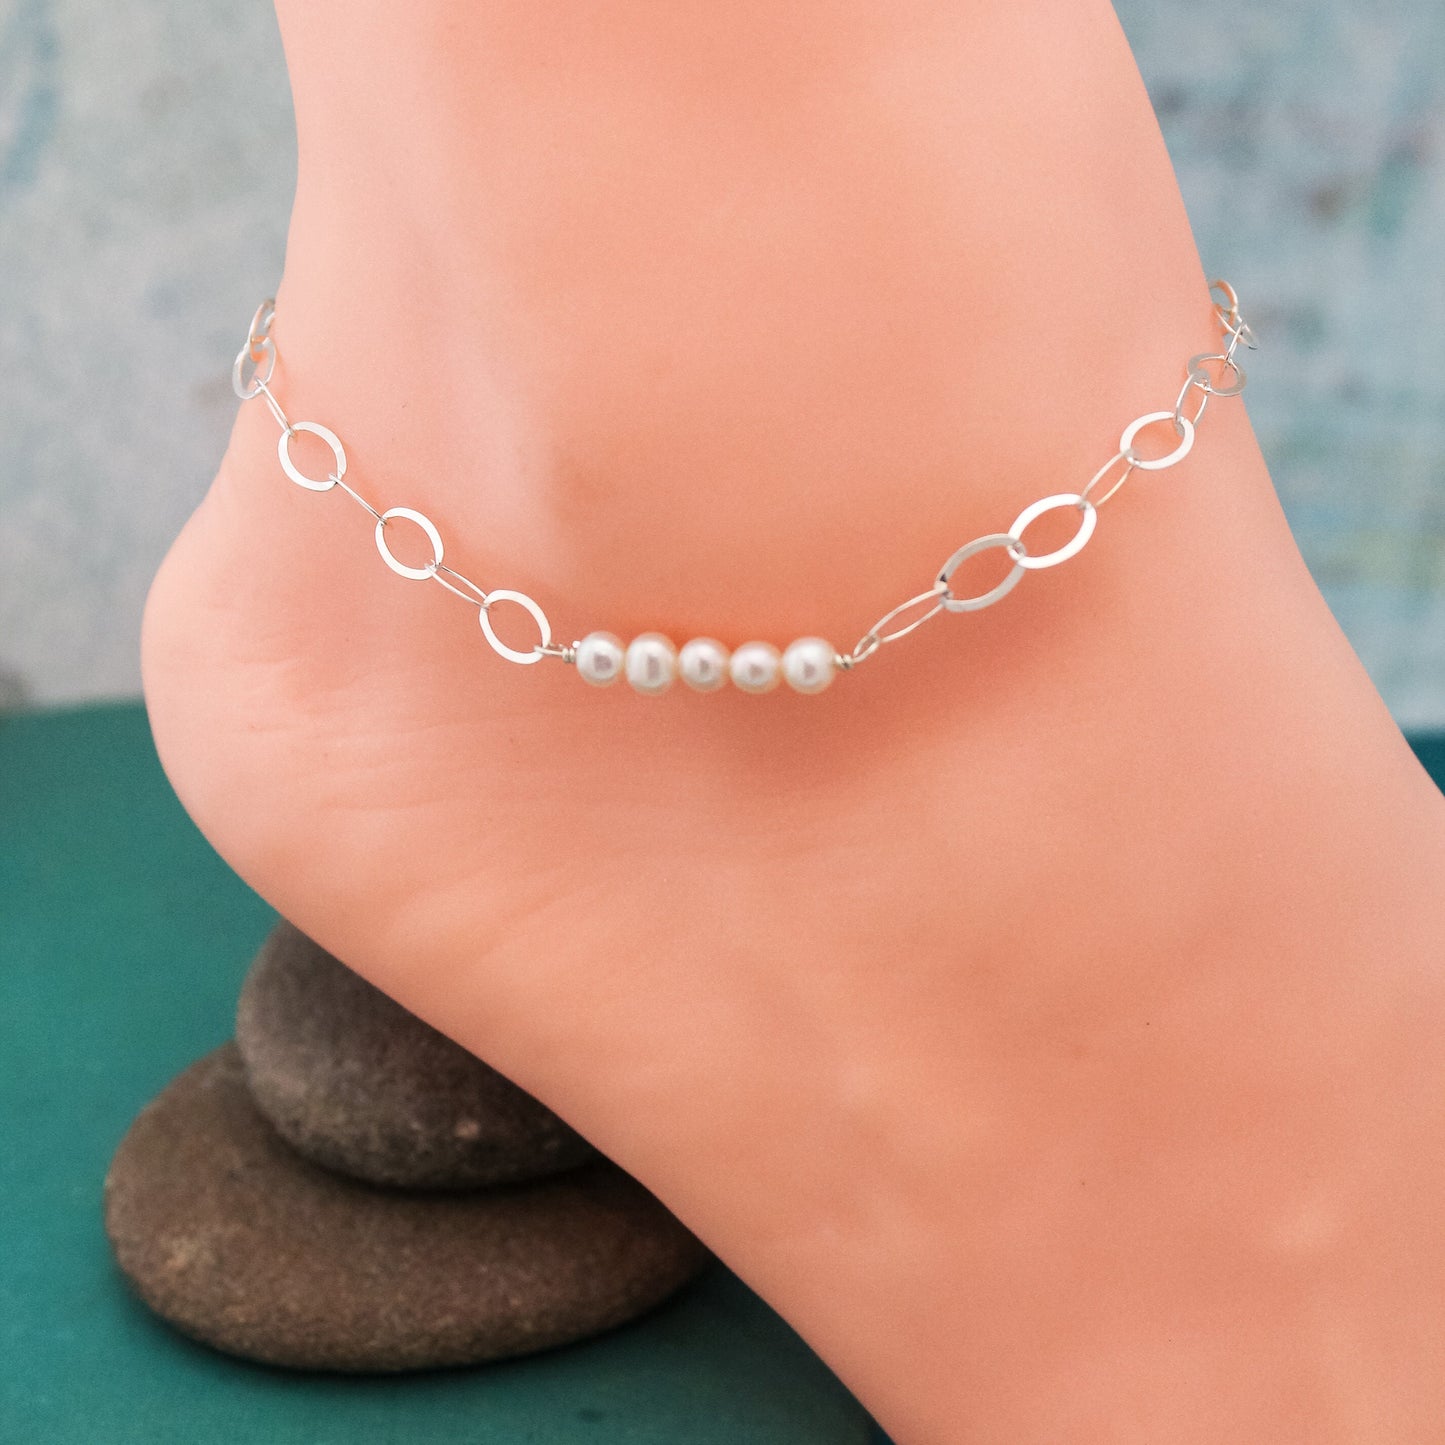 Pearl Bar Anklet, June Birthday Gift, Birthstone Jewelry, Pearl Jewelry, Sterling Silver Anklet, Gifts for Her, Summer Cruise Jewelry